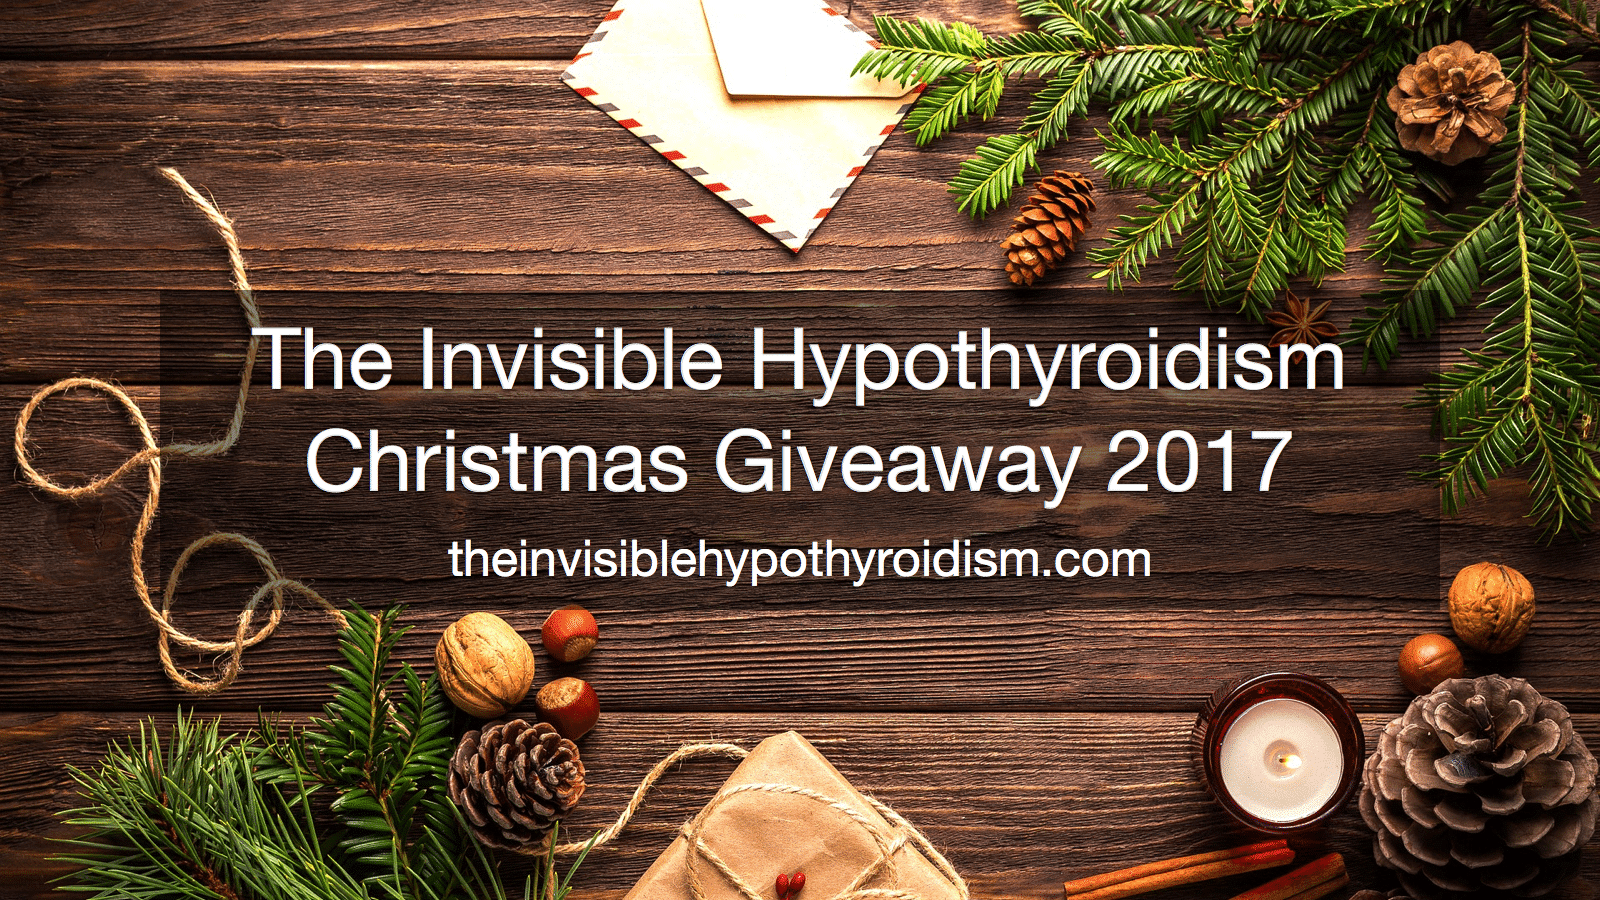 The Invisible Hypothyroidism Christmas Giveaway 2017